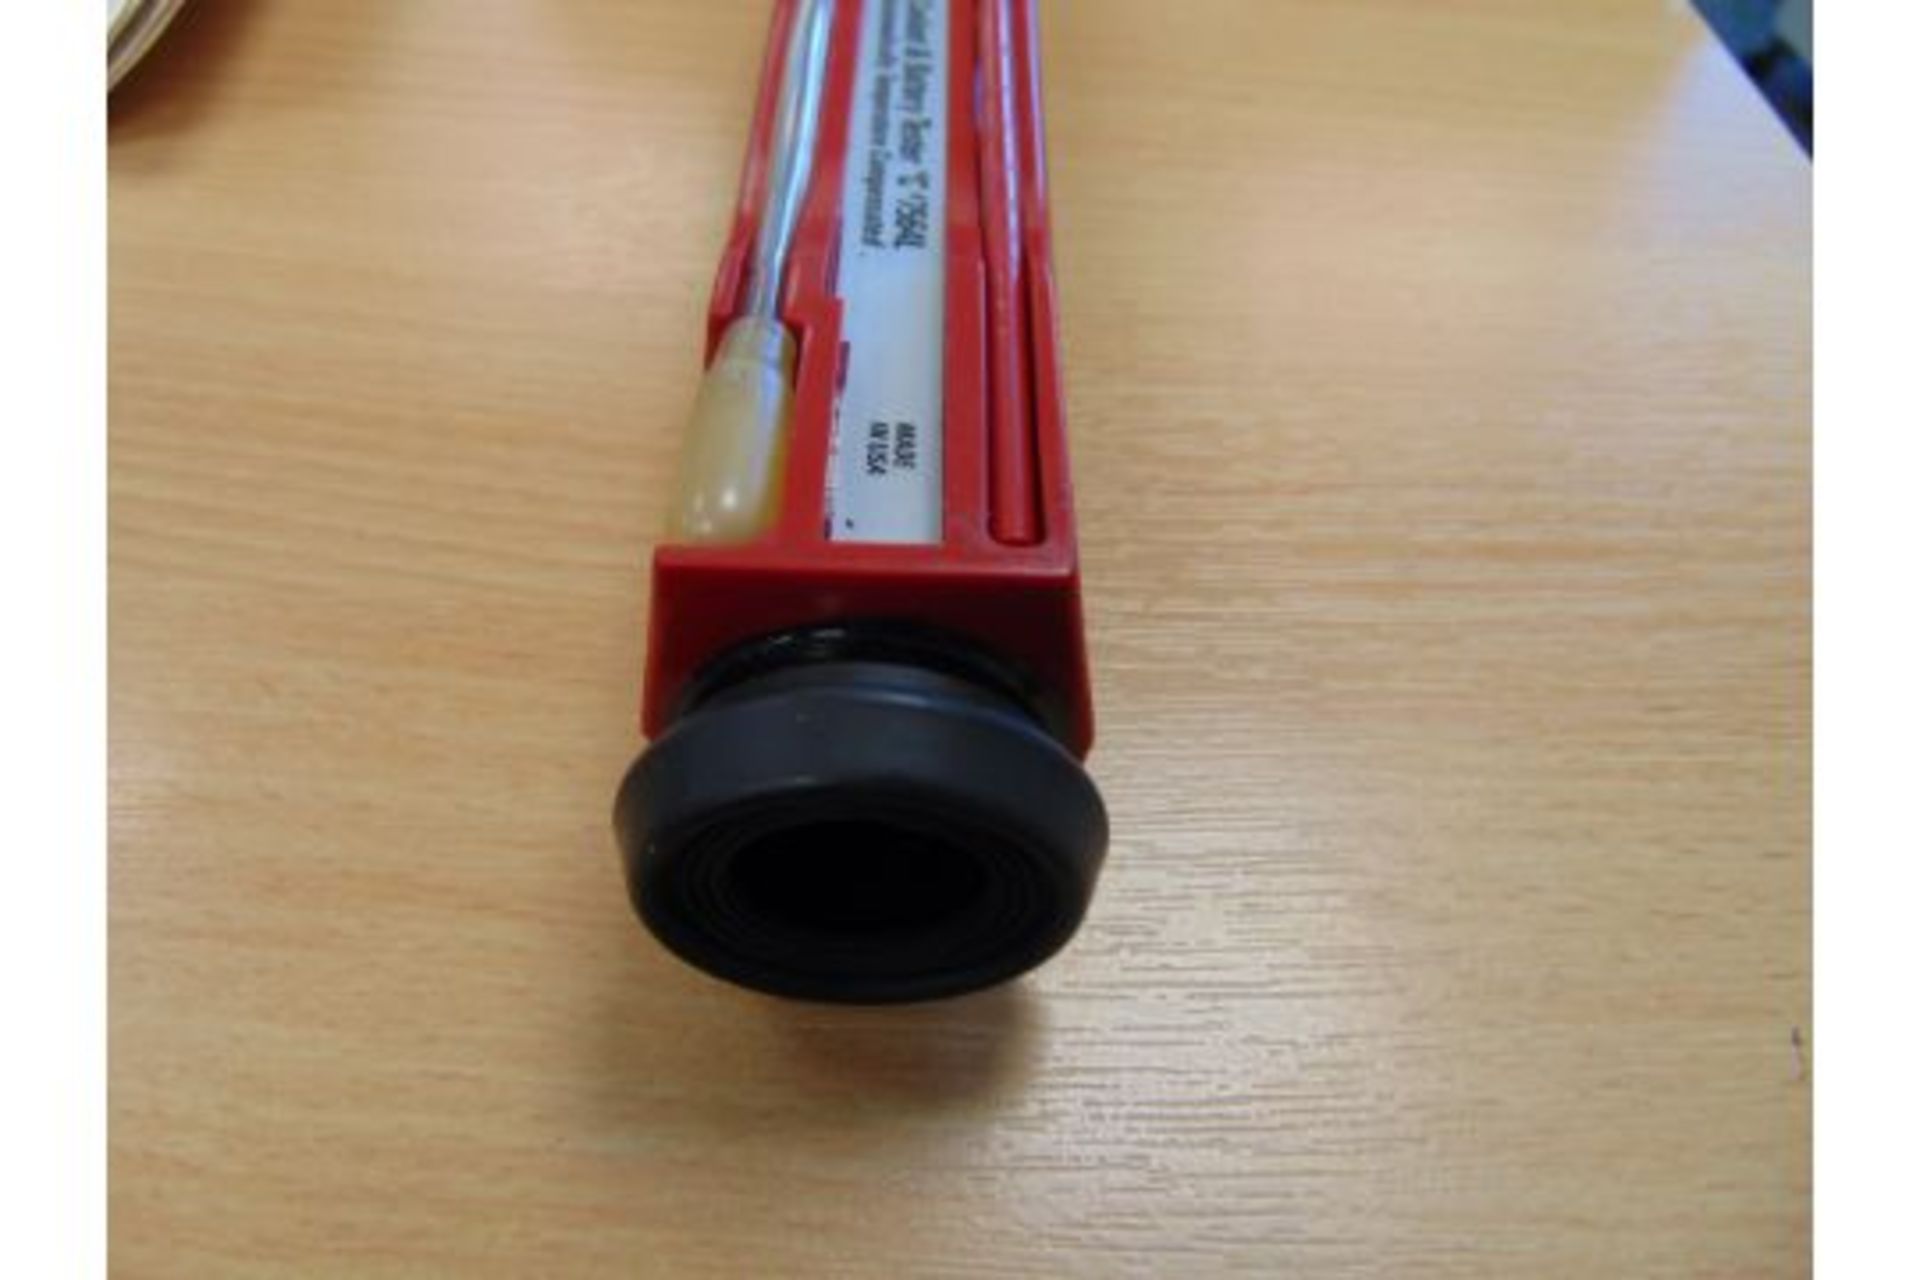 1 x Leica D60 Duo-Check Refractometer original packing with instructions - Image 3 of 9